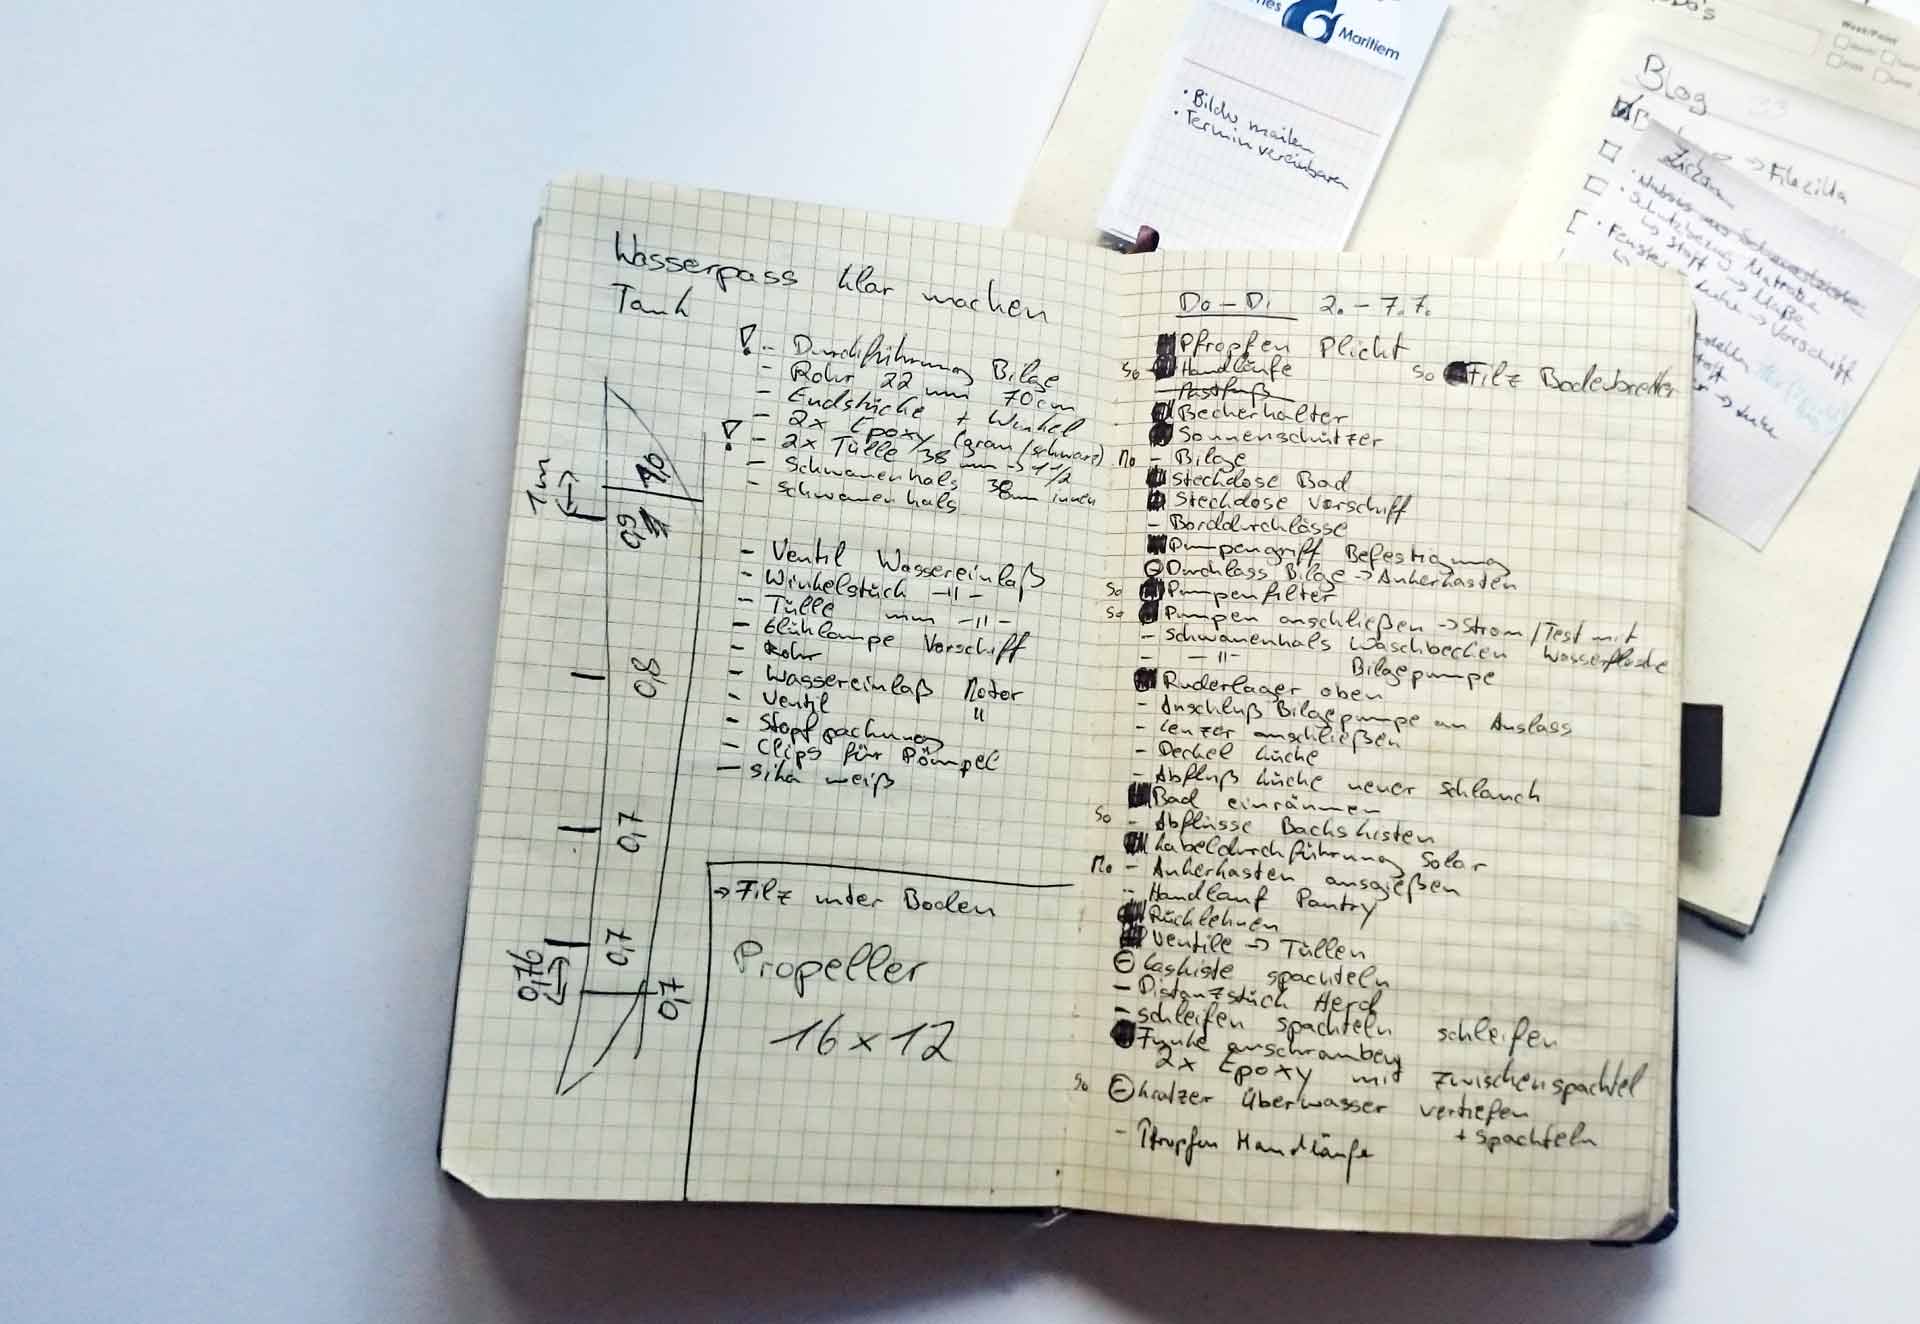 One of the handfull neatly written "Boatbook" Hanno and Nina utilized for organizing their work